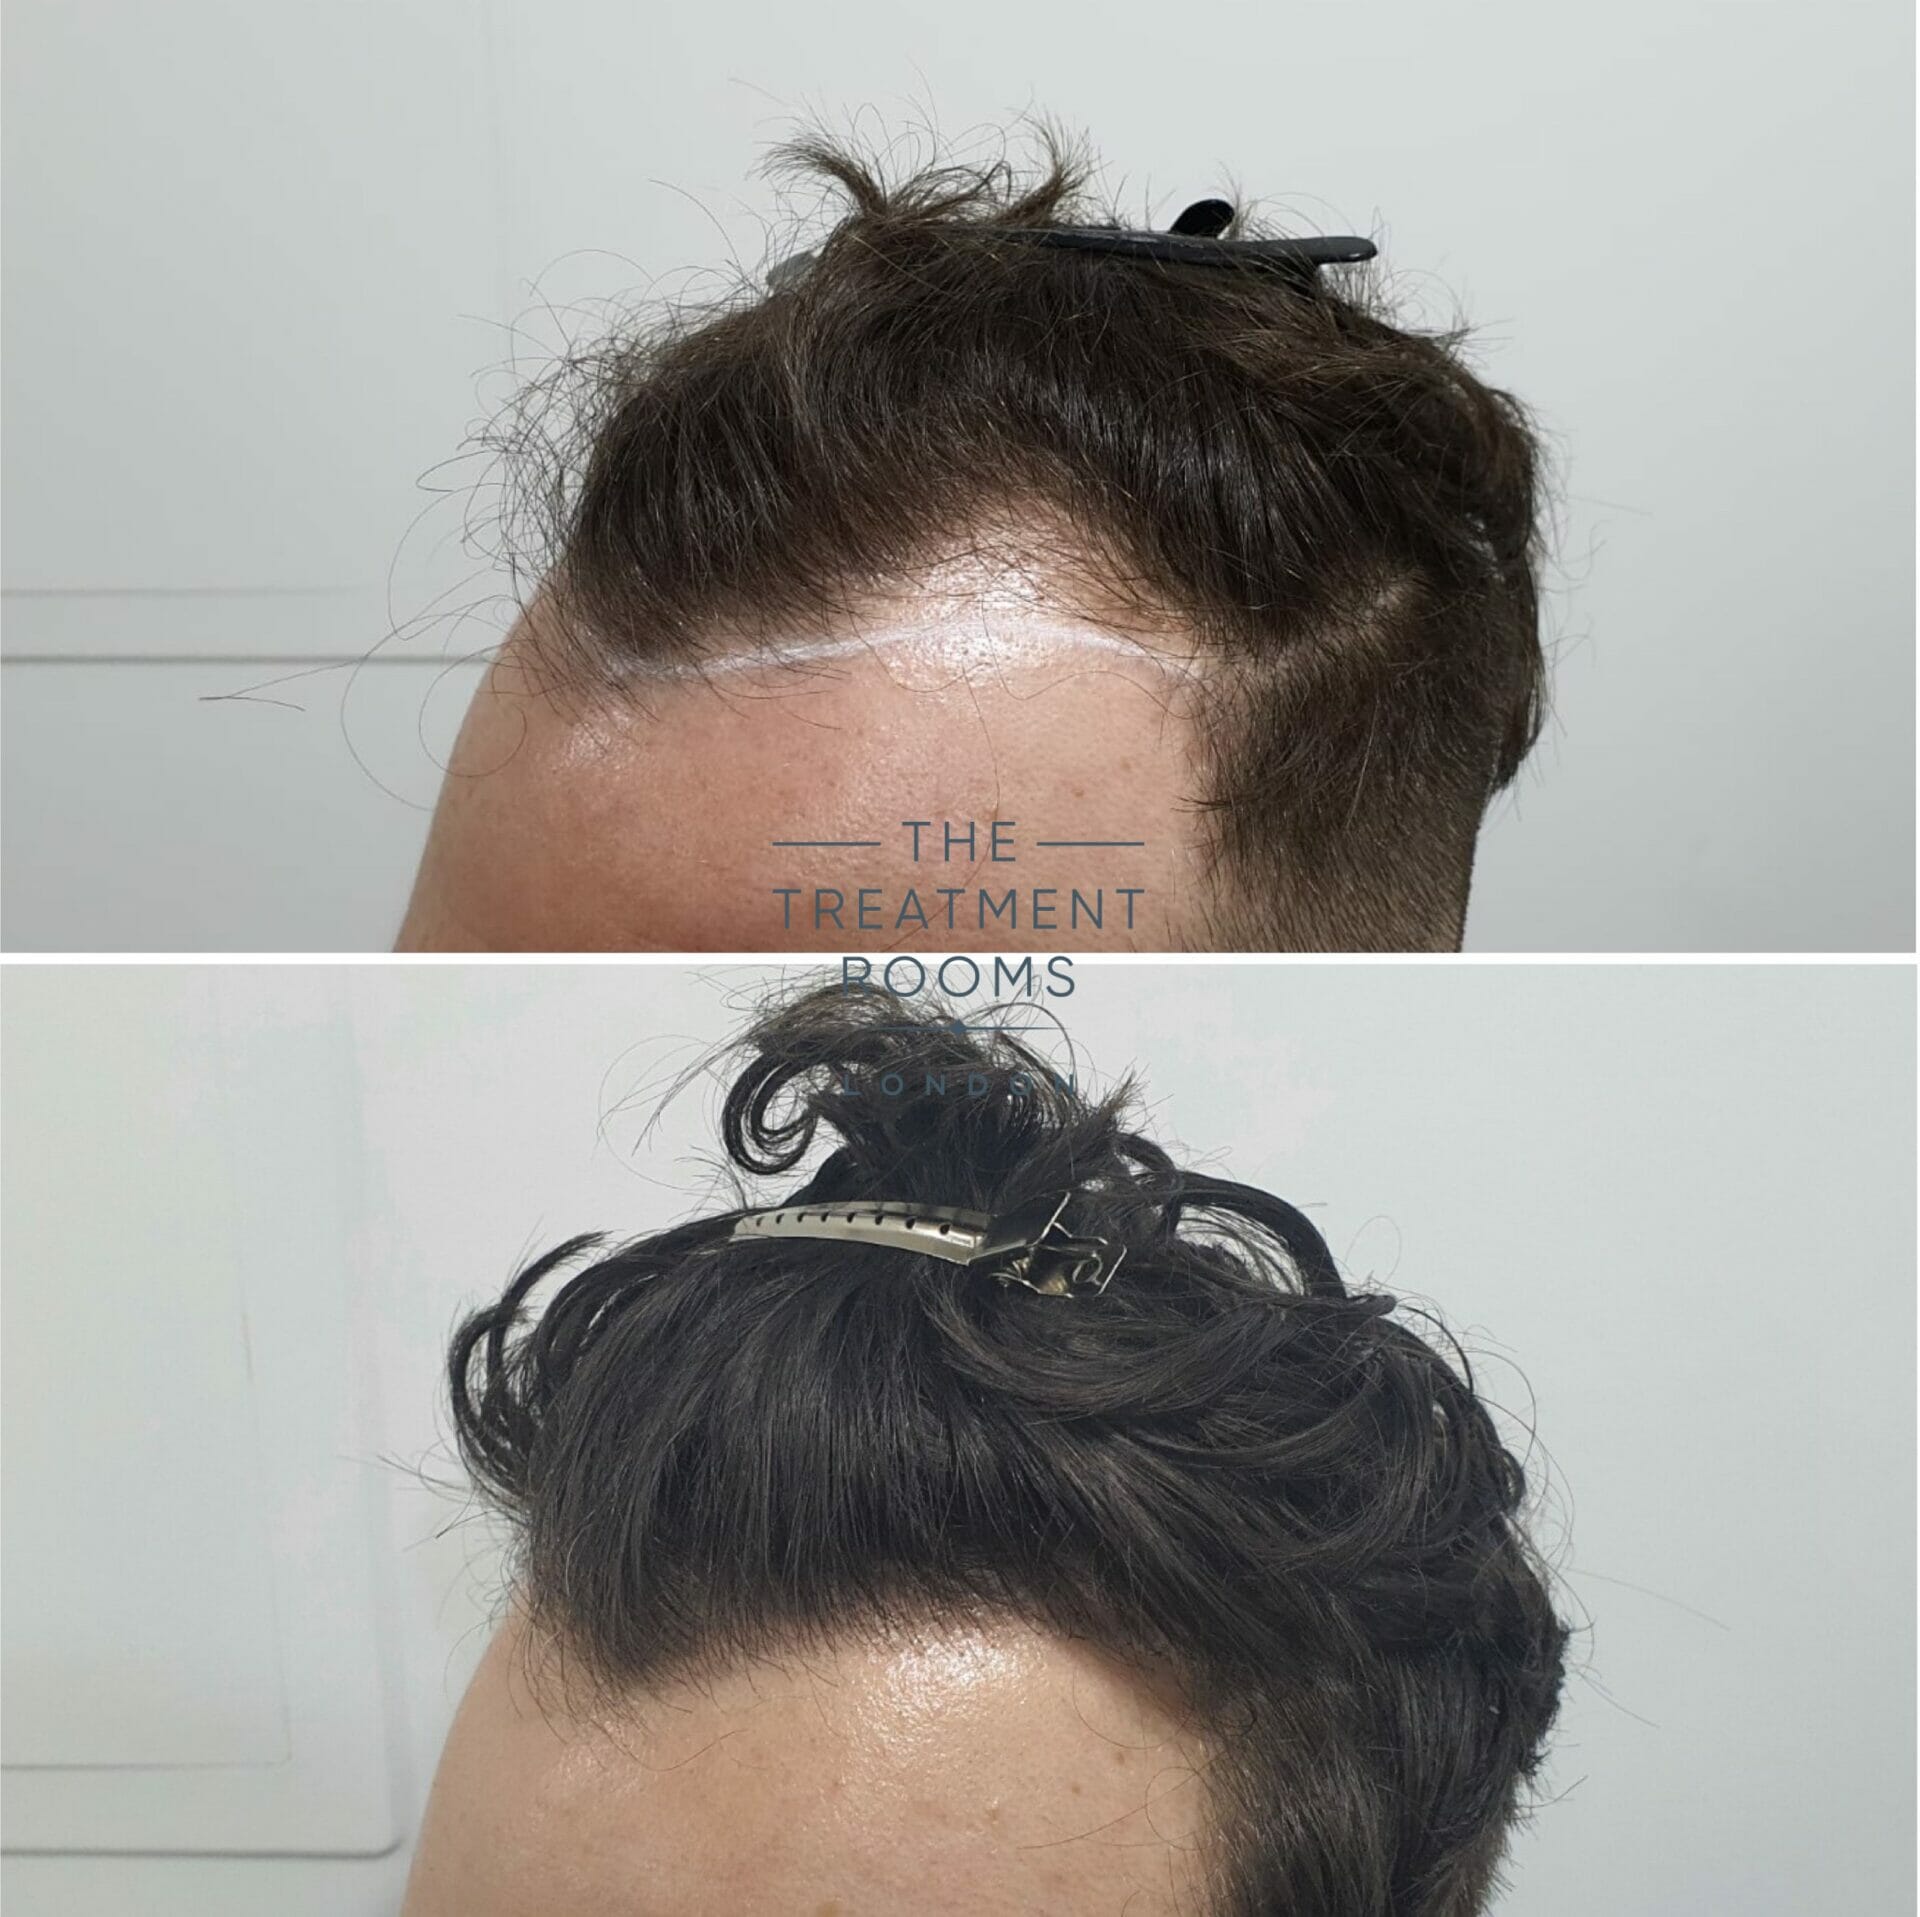 FUE Hair Transplant Result 1194 grafts - Treatment Rooms London